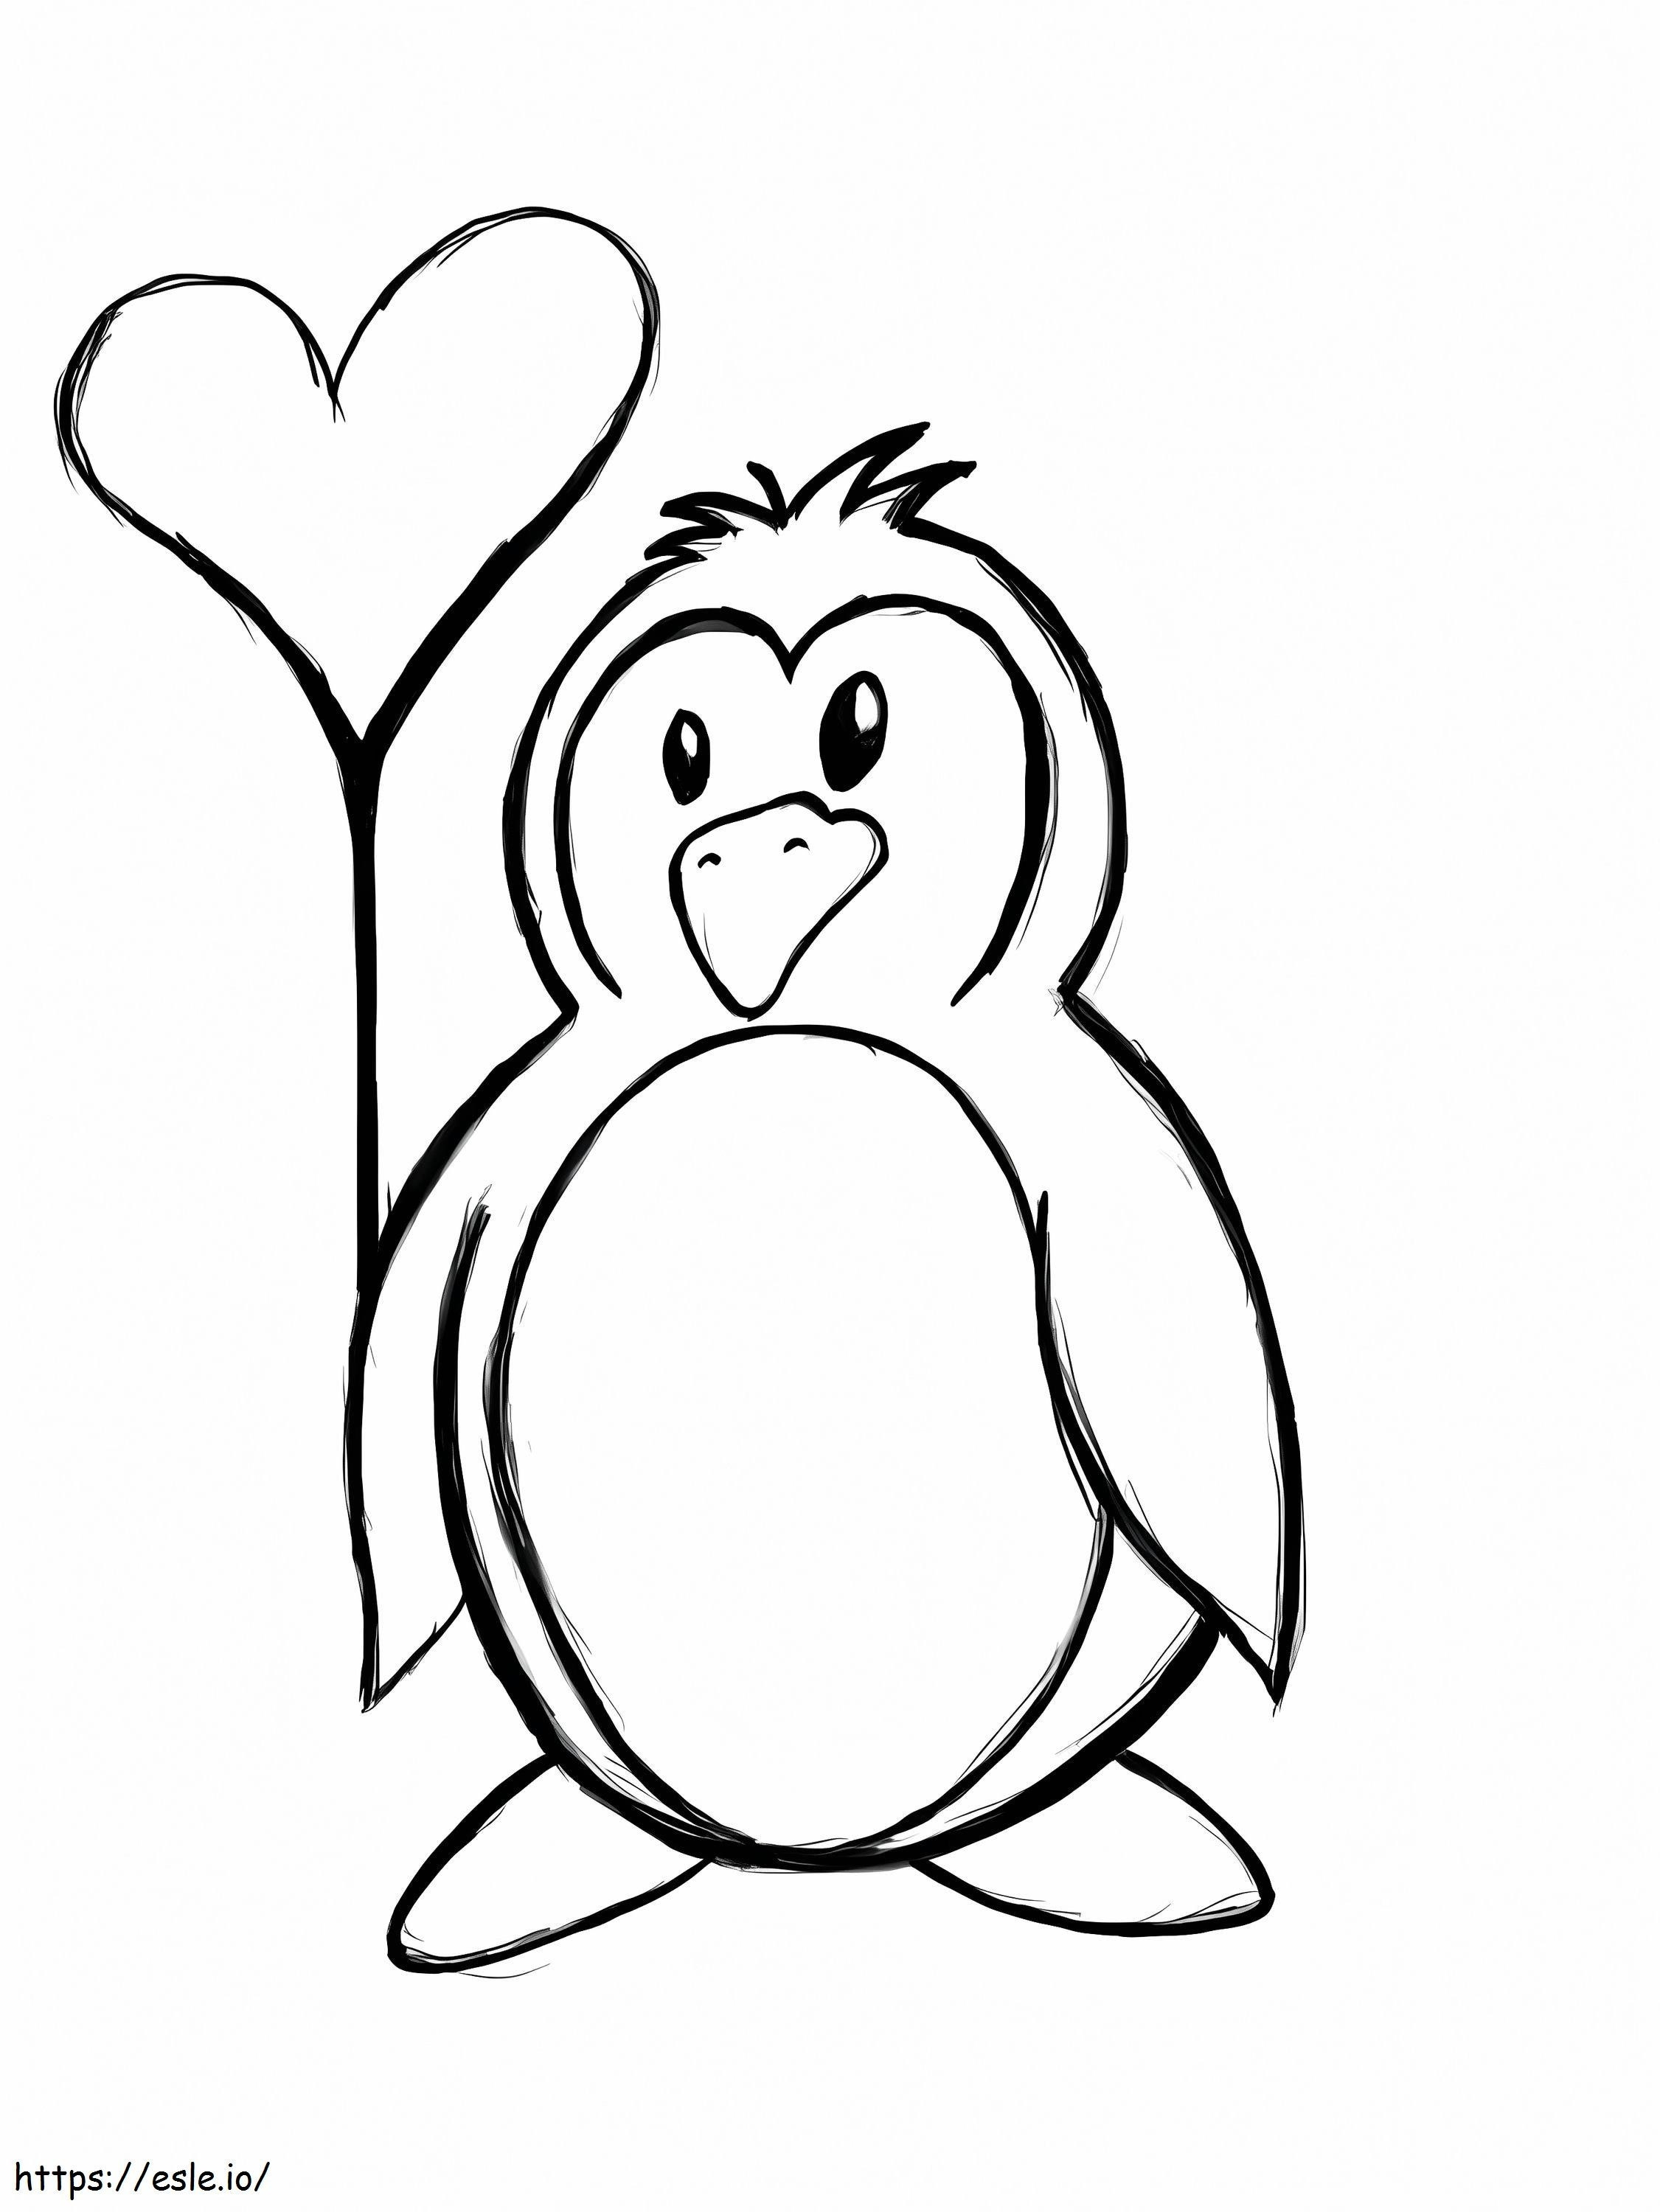 Drawing Penguin Holding Heart Balloon coloring page